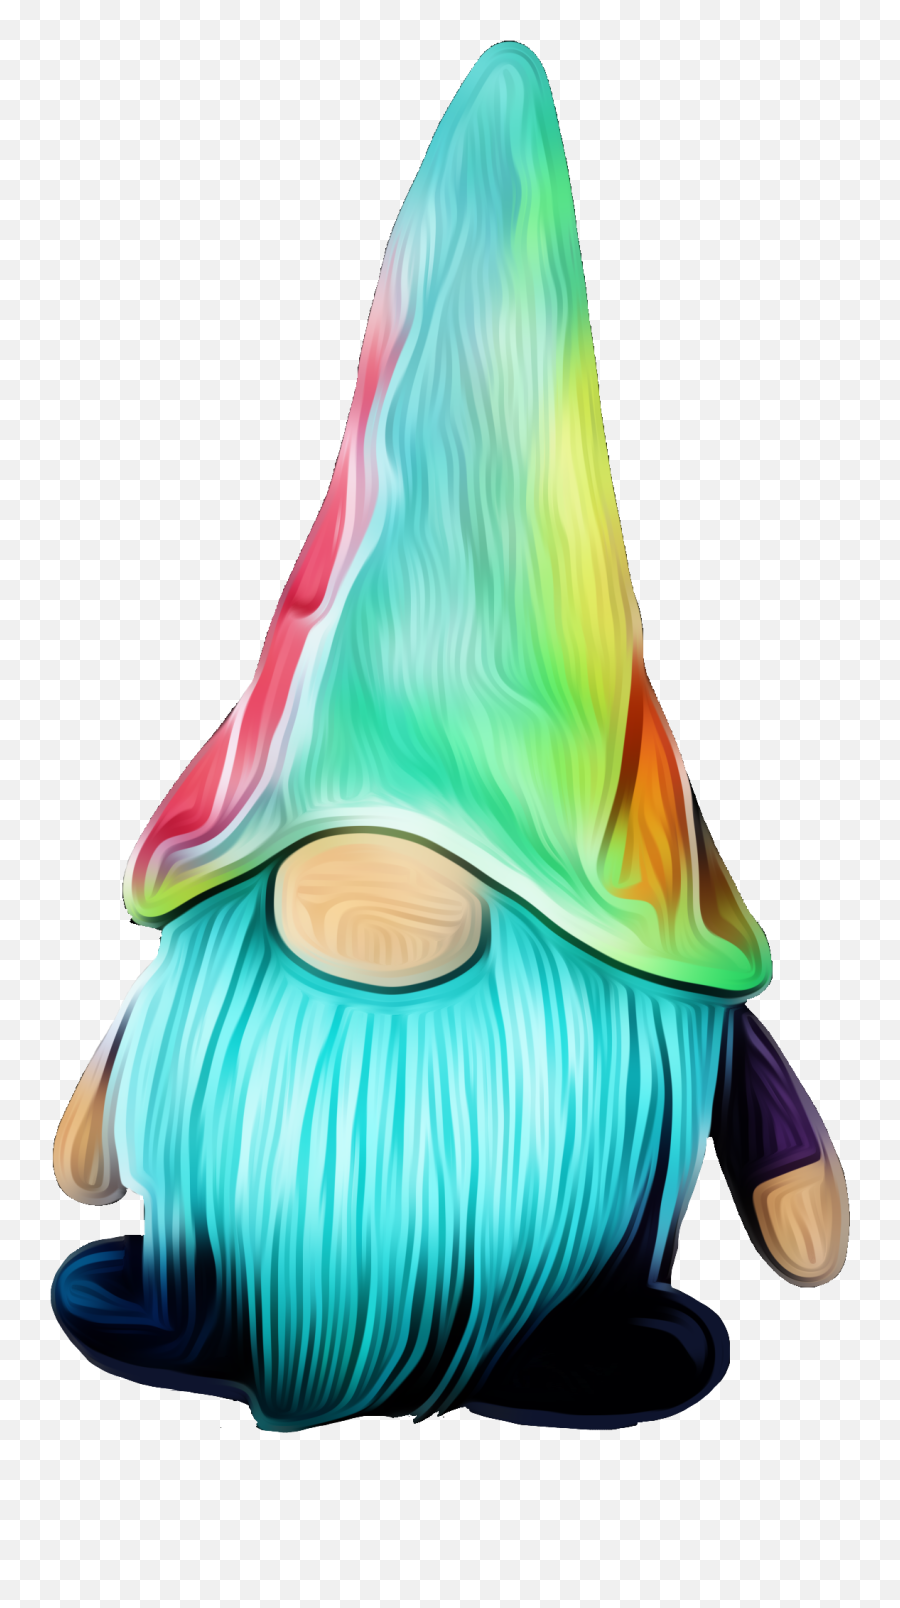 The Most Edited - Fictional Character Emoji,Garden Gnome Emoticon